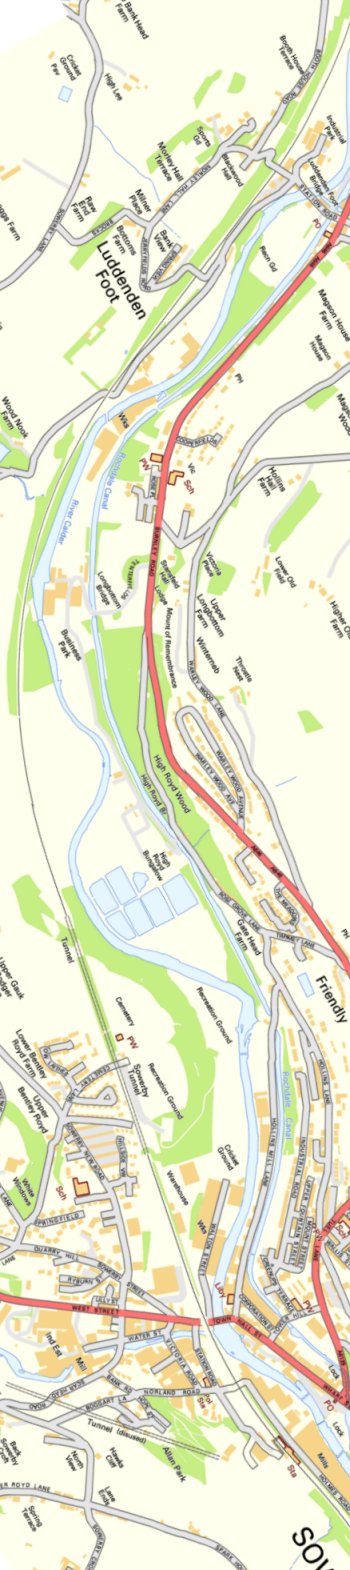 Section from Ordnance Survey OpenSource mapping 2013 showing L&YR railway line from Luddendenfoot to Sowerby Bridge